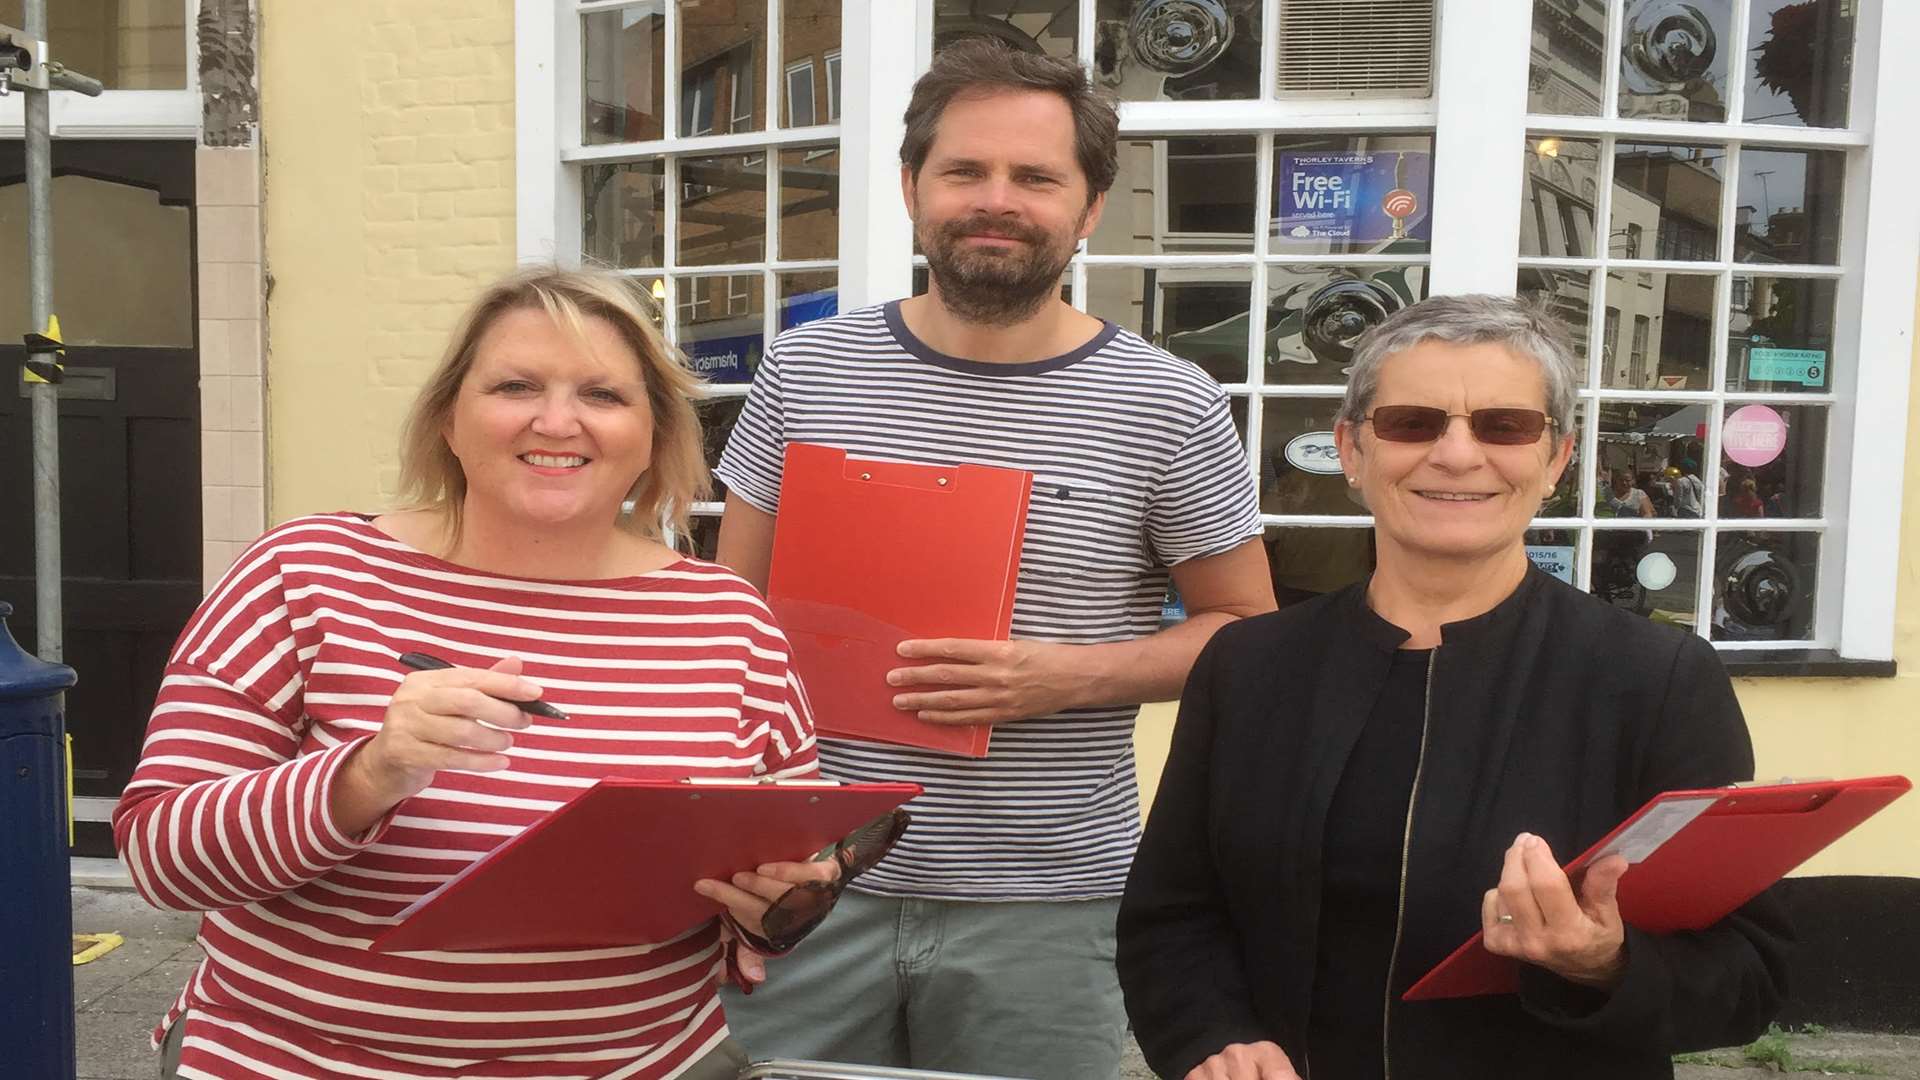 Cllr Karen Constantine, Cllr Jenny Matterface with volunteer Gary Smith collecting signatures